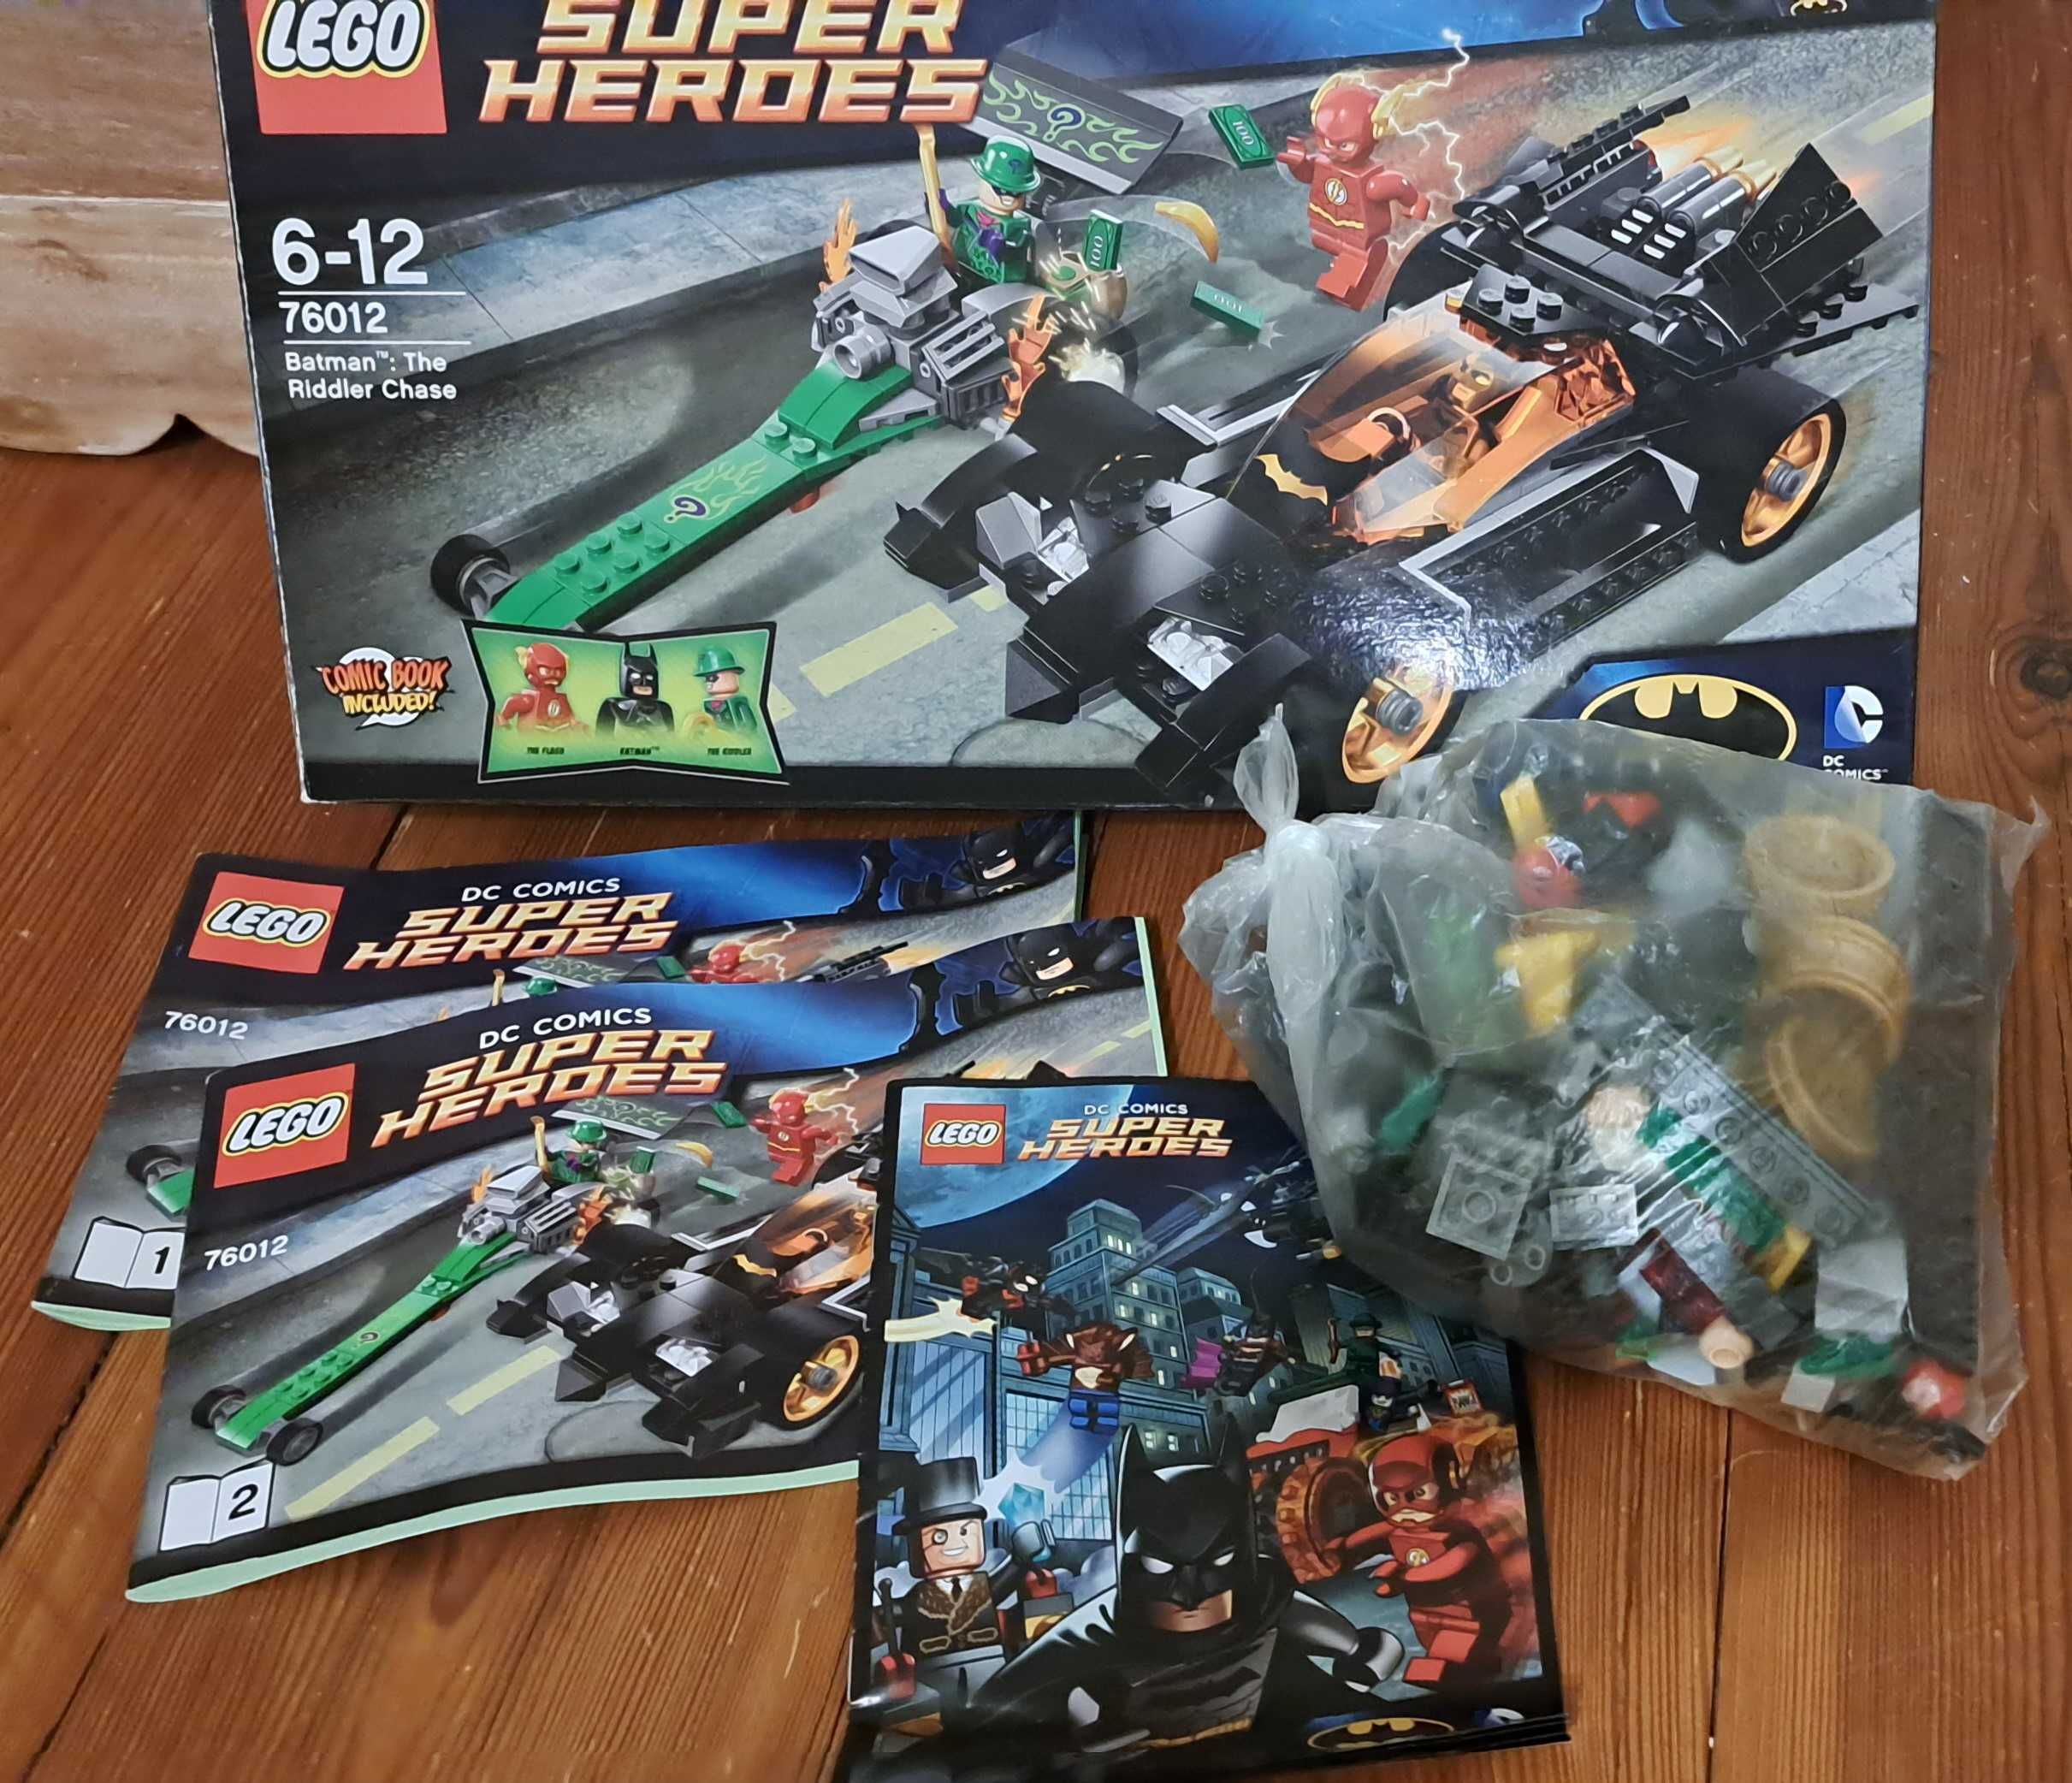 LEGO Super Heroes 76012 The Riddler Chase